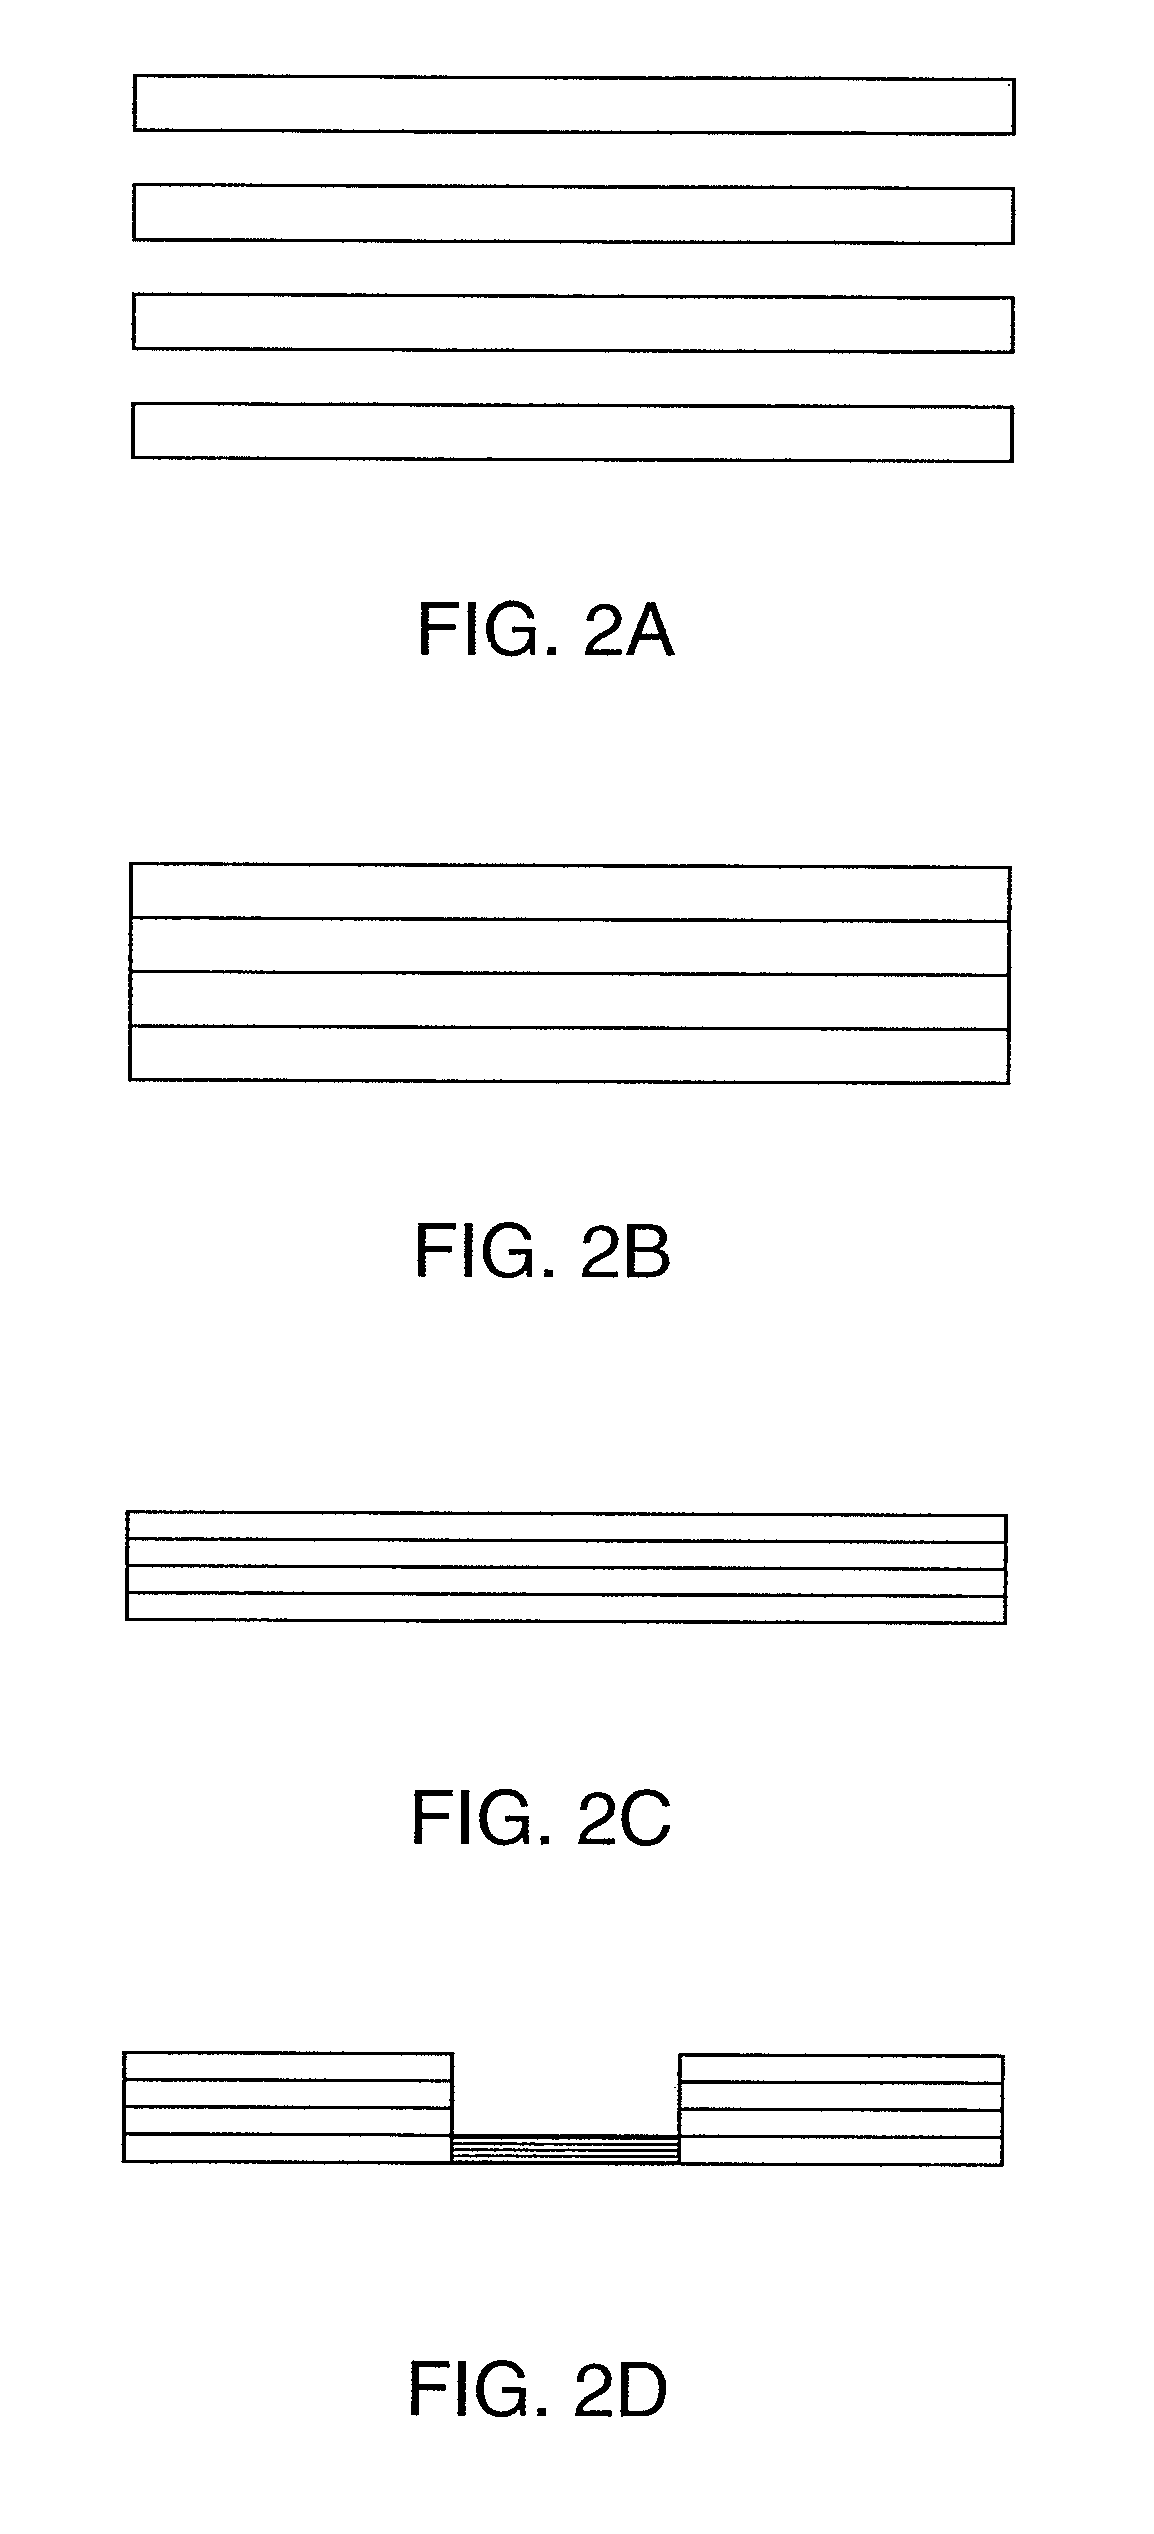 Apparatus and method for easing use of a spectrophotometric based noninvasive analyzer